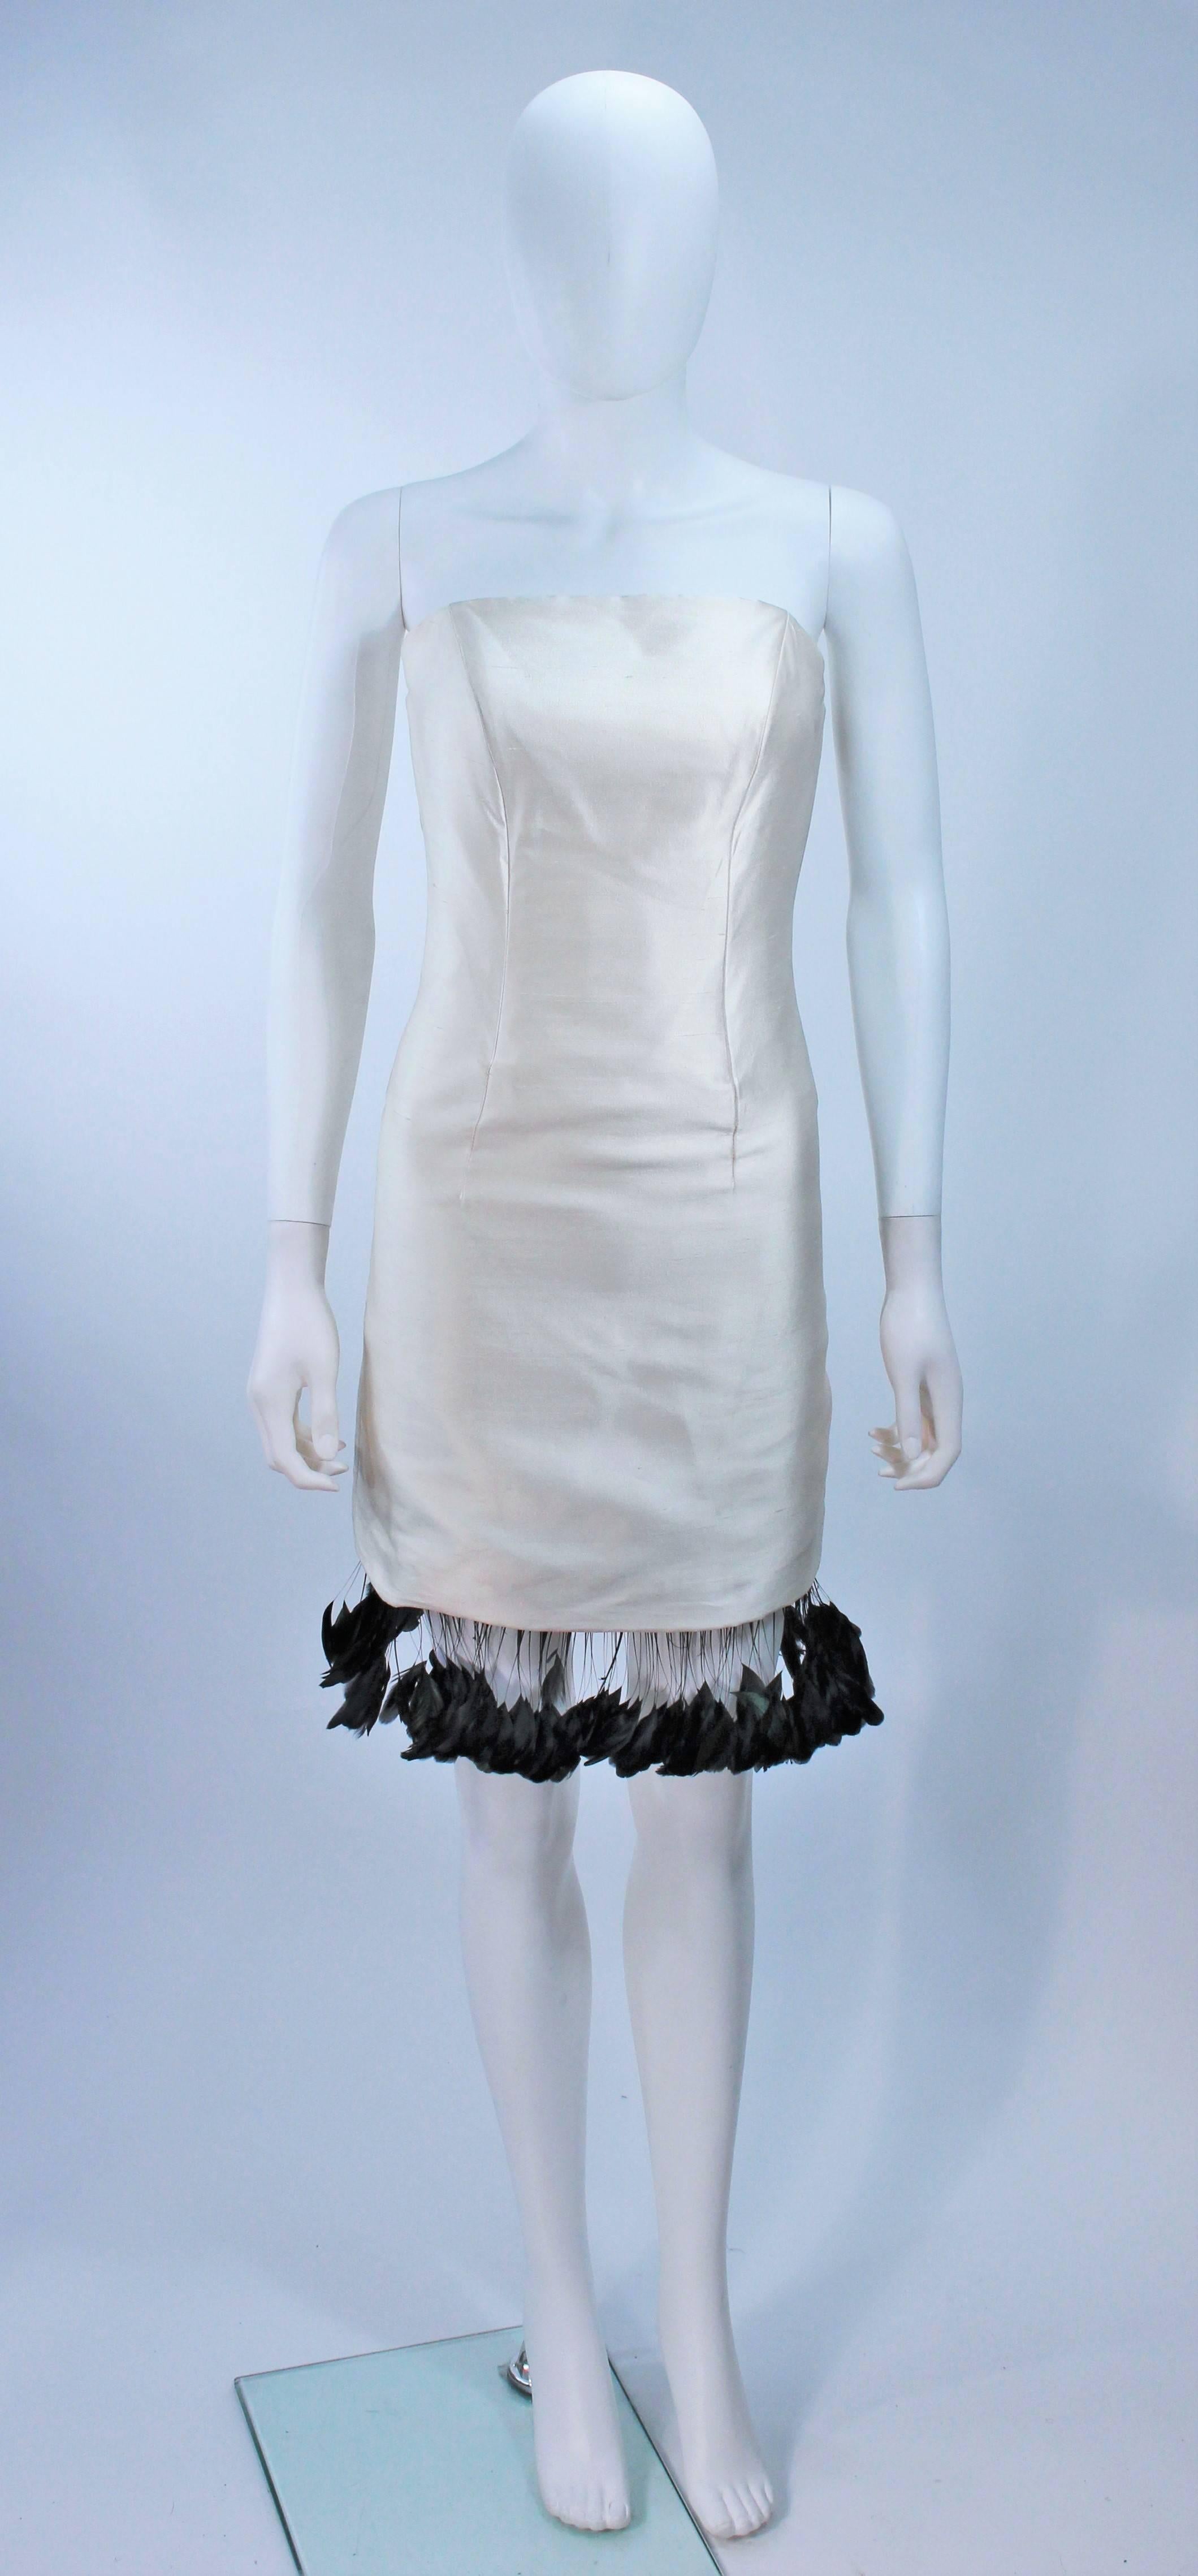  This Cantu & Castillo cocktail dress is composed of a raw white silk with a black iridescent feather trim. There is a center back zipper closure. In great vintage condition. 

  **Please cross-reference measurements for personal accuracy. Size in